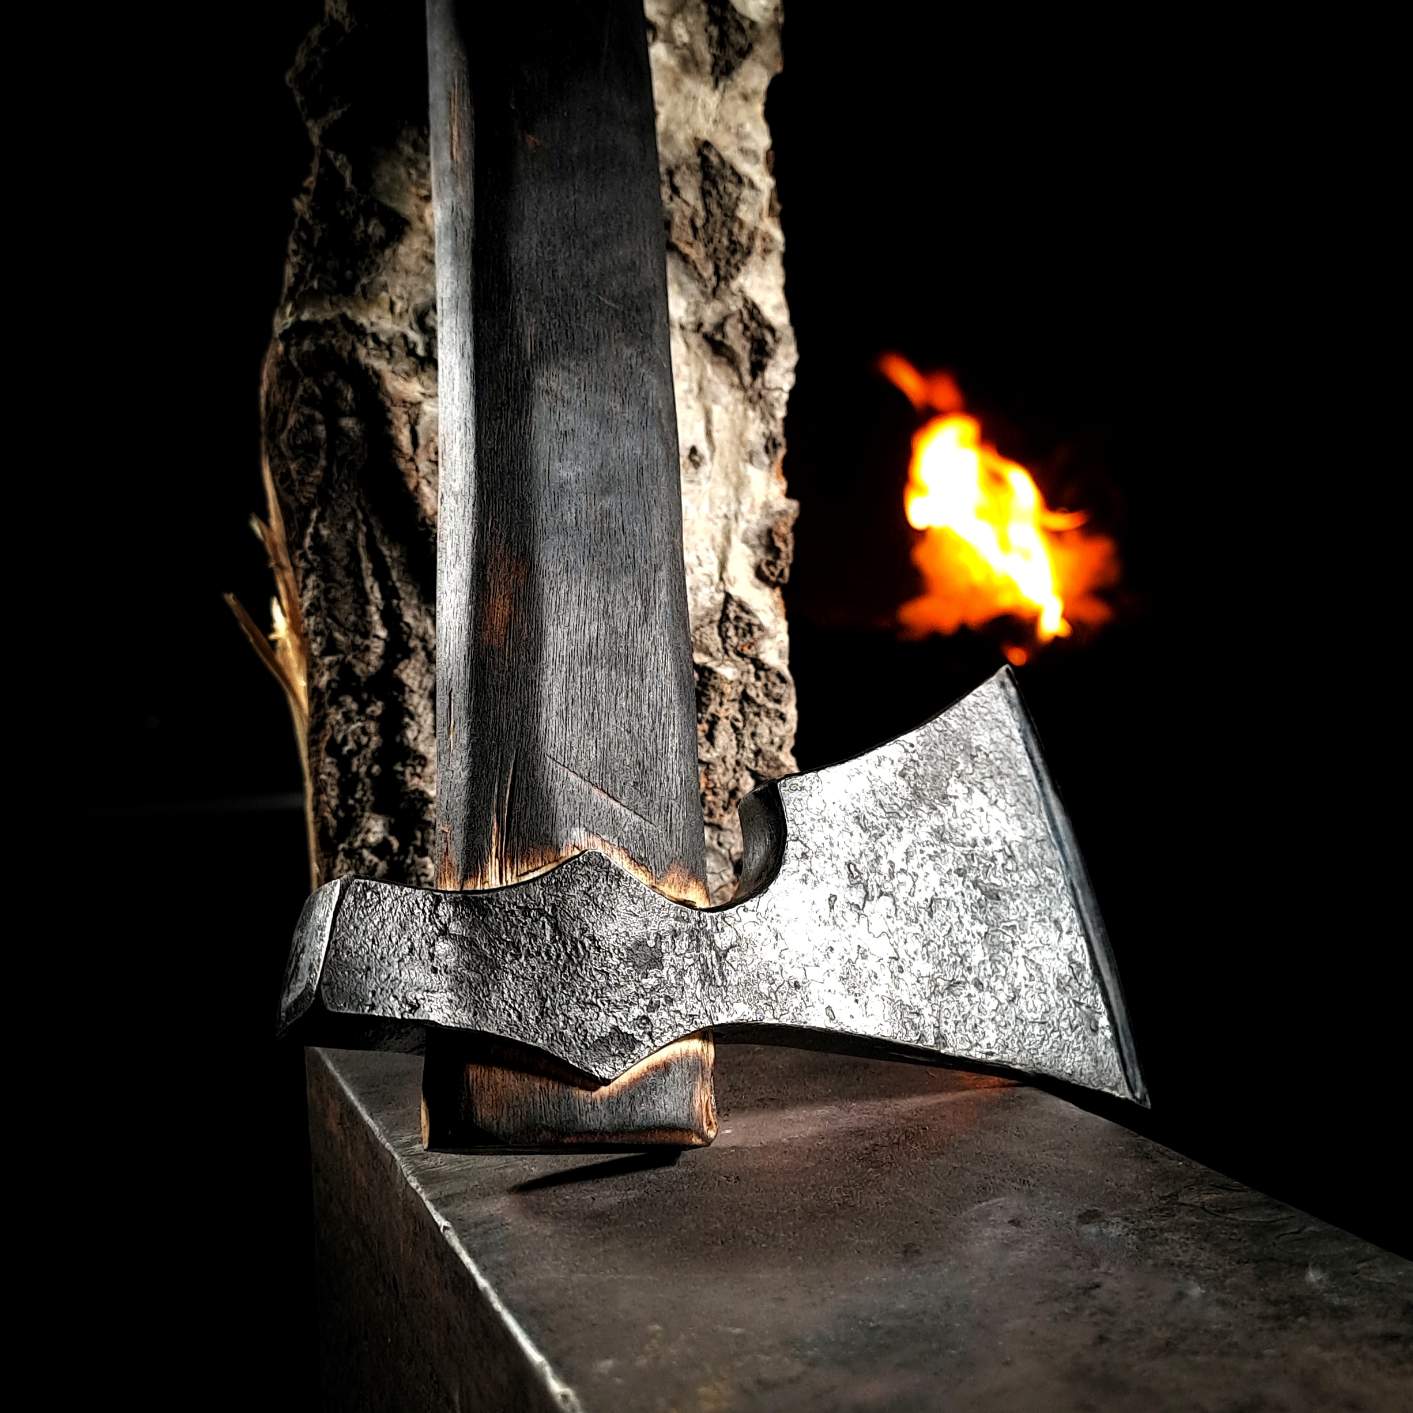 A close-up photo of a hand-forged authentic Viking axe in a.  The axe head is forged from high-carbon steel and the handle is made from carefully selected hardwood.